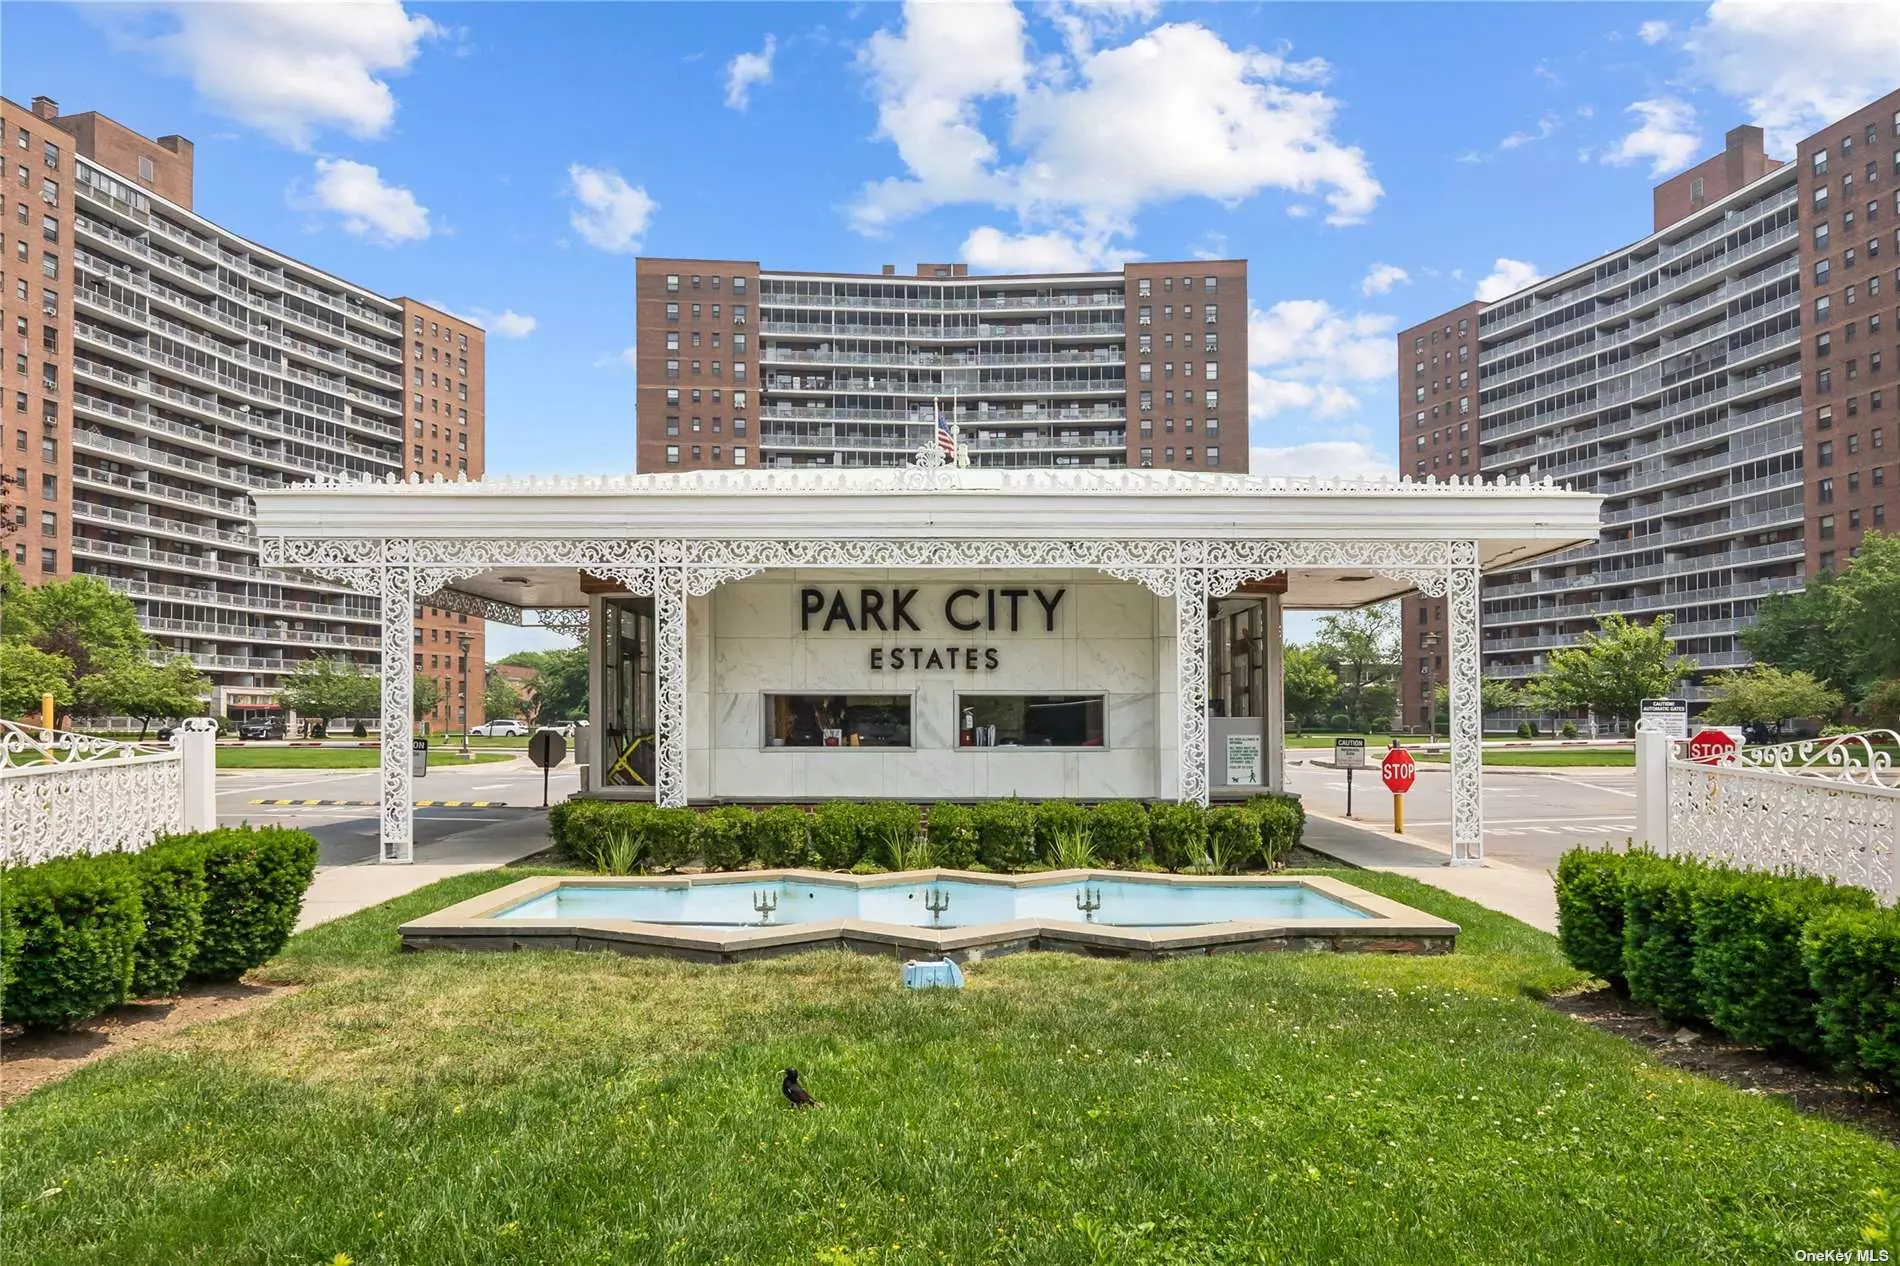 Welcome to Park City Estates located in a Gated community. This 3 bedroom 2 bathroom apartment boasting natural light is this spacious corner unit with ample closet space and a landing foyer upon your entrance. This spacious and open apartment features 1328 of Square feet and a terrace with an amazing view of Rego Park & Forest hills. The Main large bedroom has it&rsquo;s own En-suite bathroom with ample closet space. This is a corner apartment that has Views North, North West, North East & East Facing. here&rsquo;s a Doorman on shift for 16 hours a day. Subletting is allowed after 2 years of ownership and pets are allowed as well. Park City Estates is minutes away from Queens Center Mall and Rego Park Center Mall with its shopping & restaurants including Costco, Aldi, Panera, Chipotle, and much more. Close proximity to Flushing Meadows Park, CitiField, Queens Zoo, U.S. Open Tennis Center There are numerous transportation options with the subway/express buses going into the Manhattan.